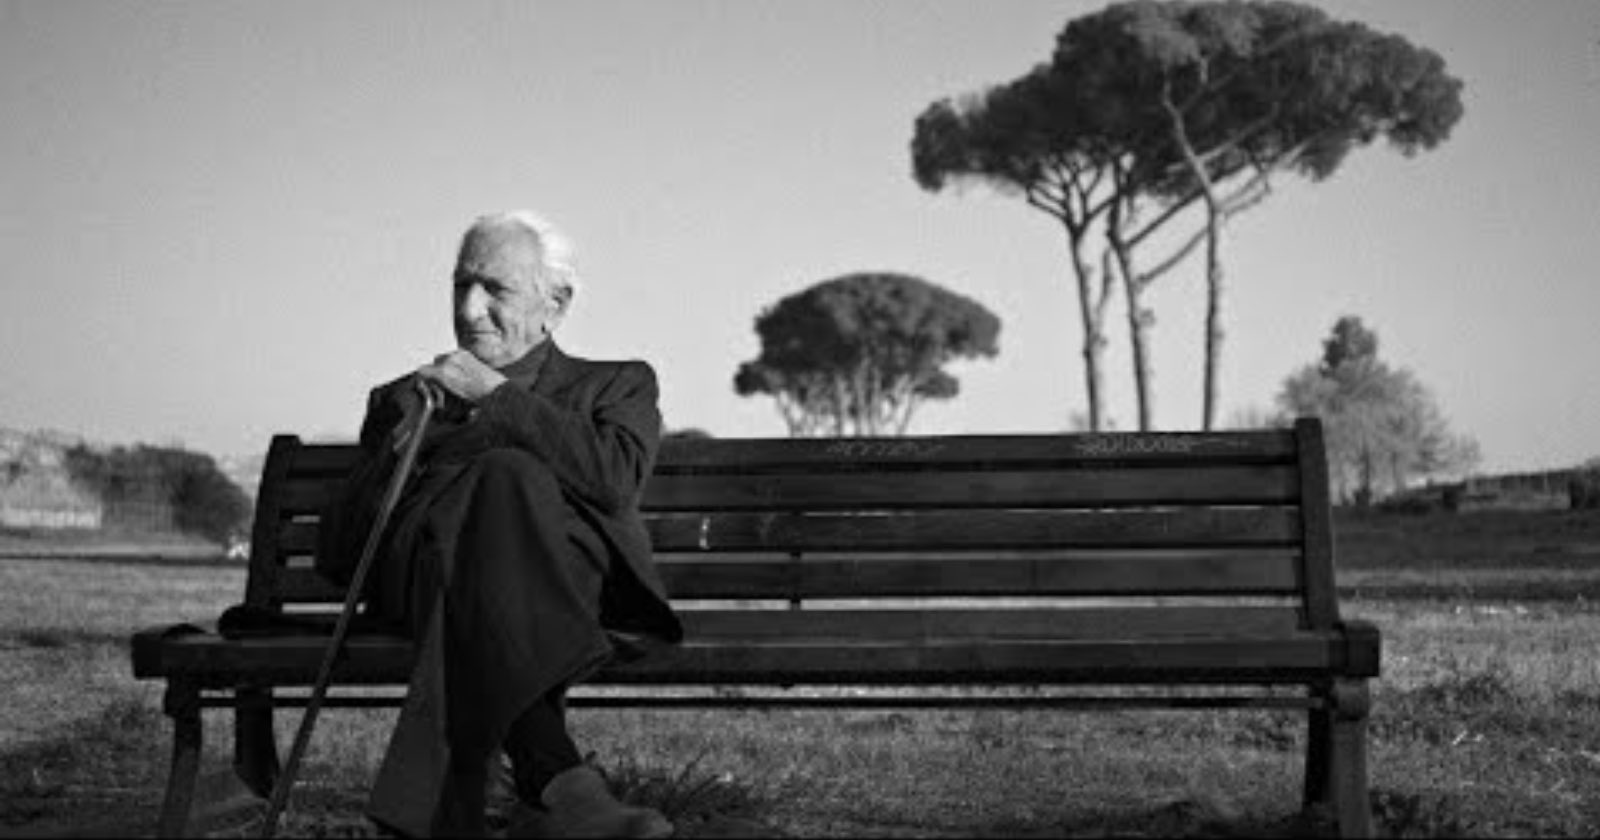 Renowned Italian Photographer Paolo Di Paolo Dies Aged 98 | PetaPixel